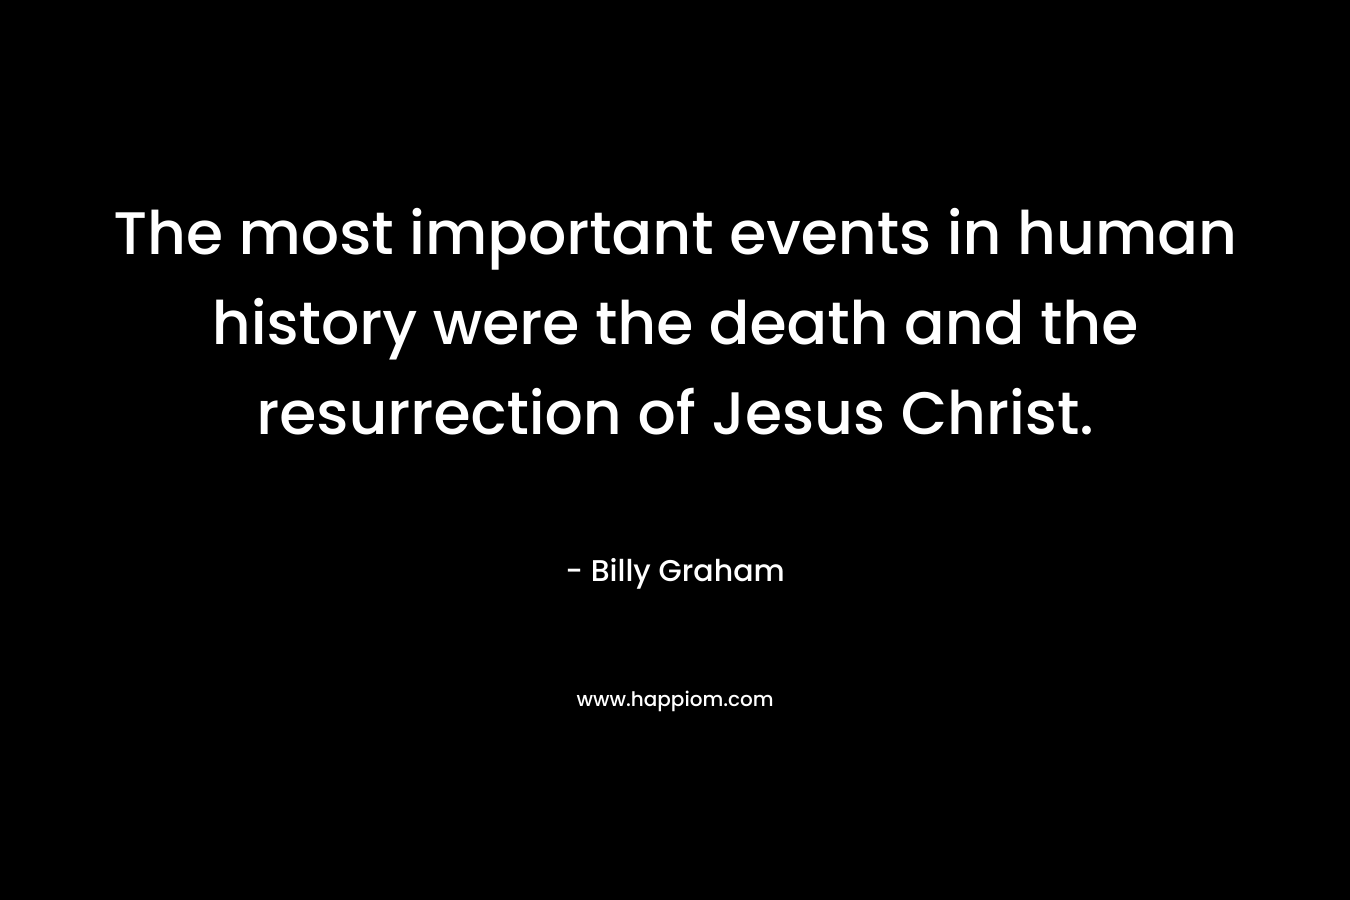 The most important events in human history were the death and the resurrection of Jesus Christ.